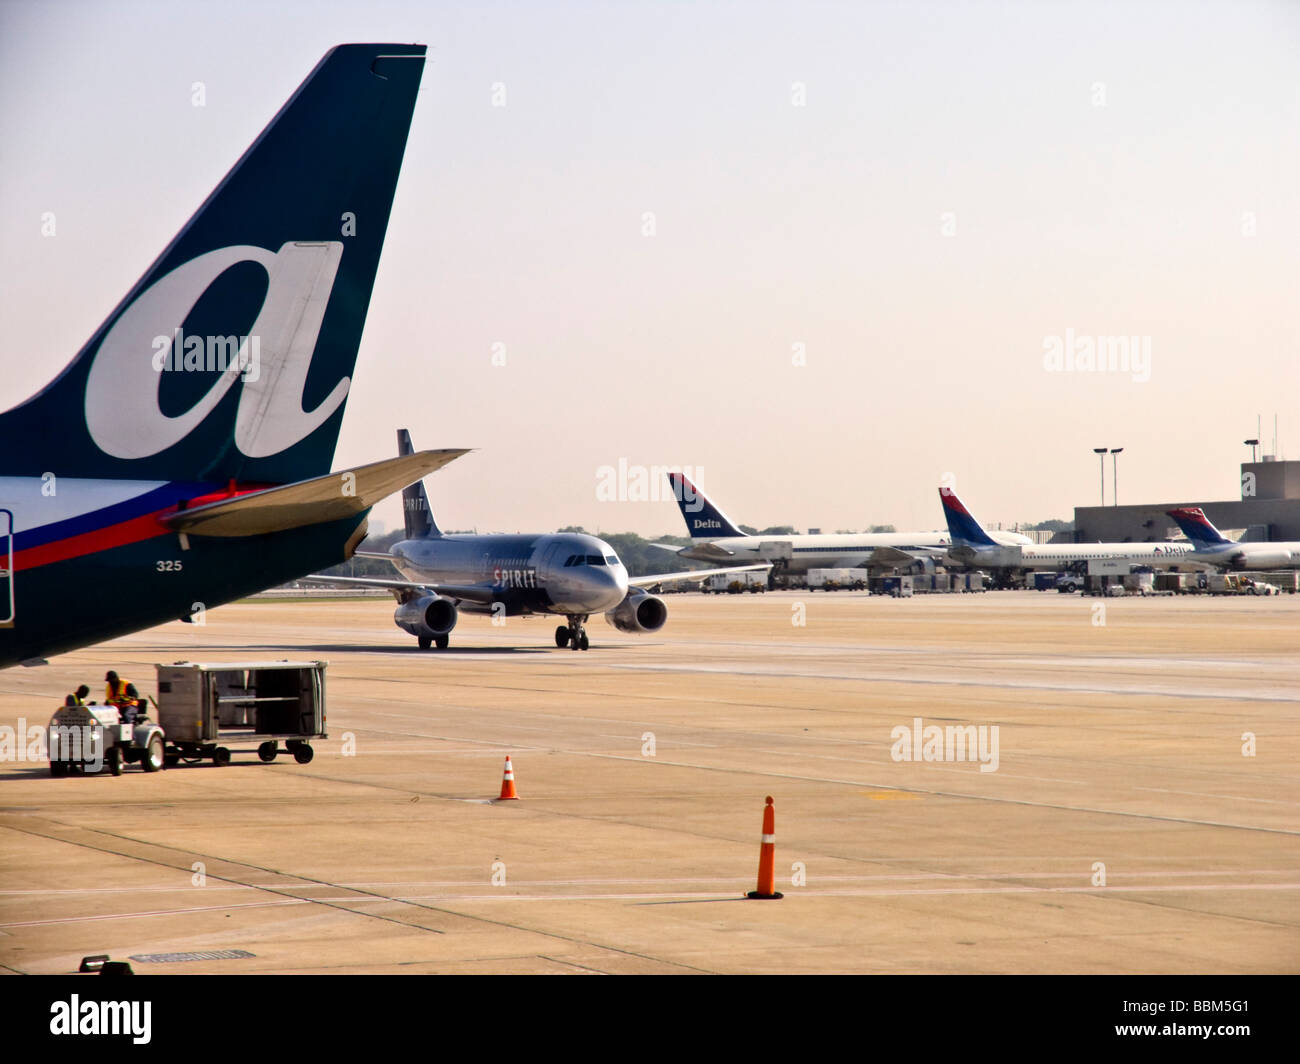 Commercial Aviation, airlines on ground at airport. Stock Photo